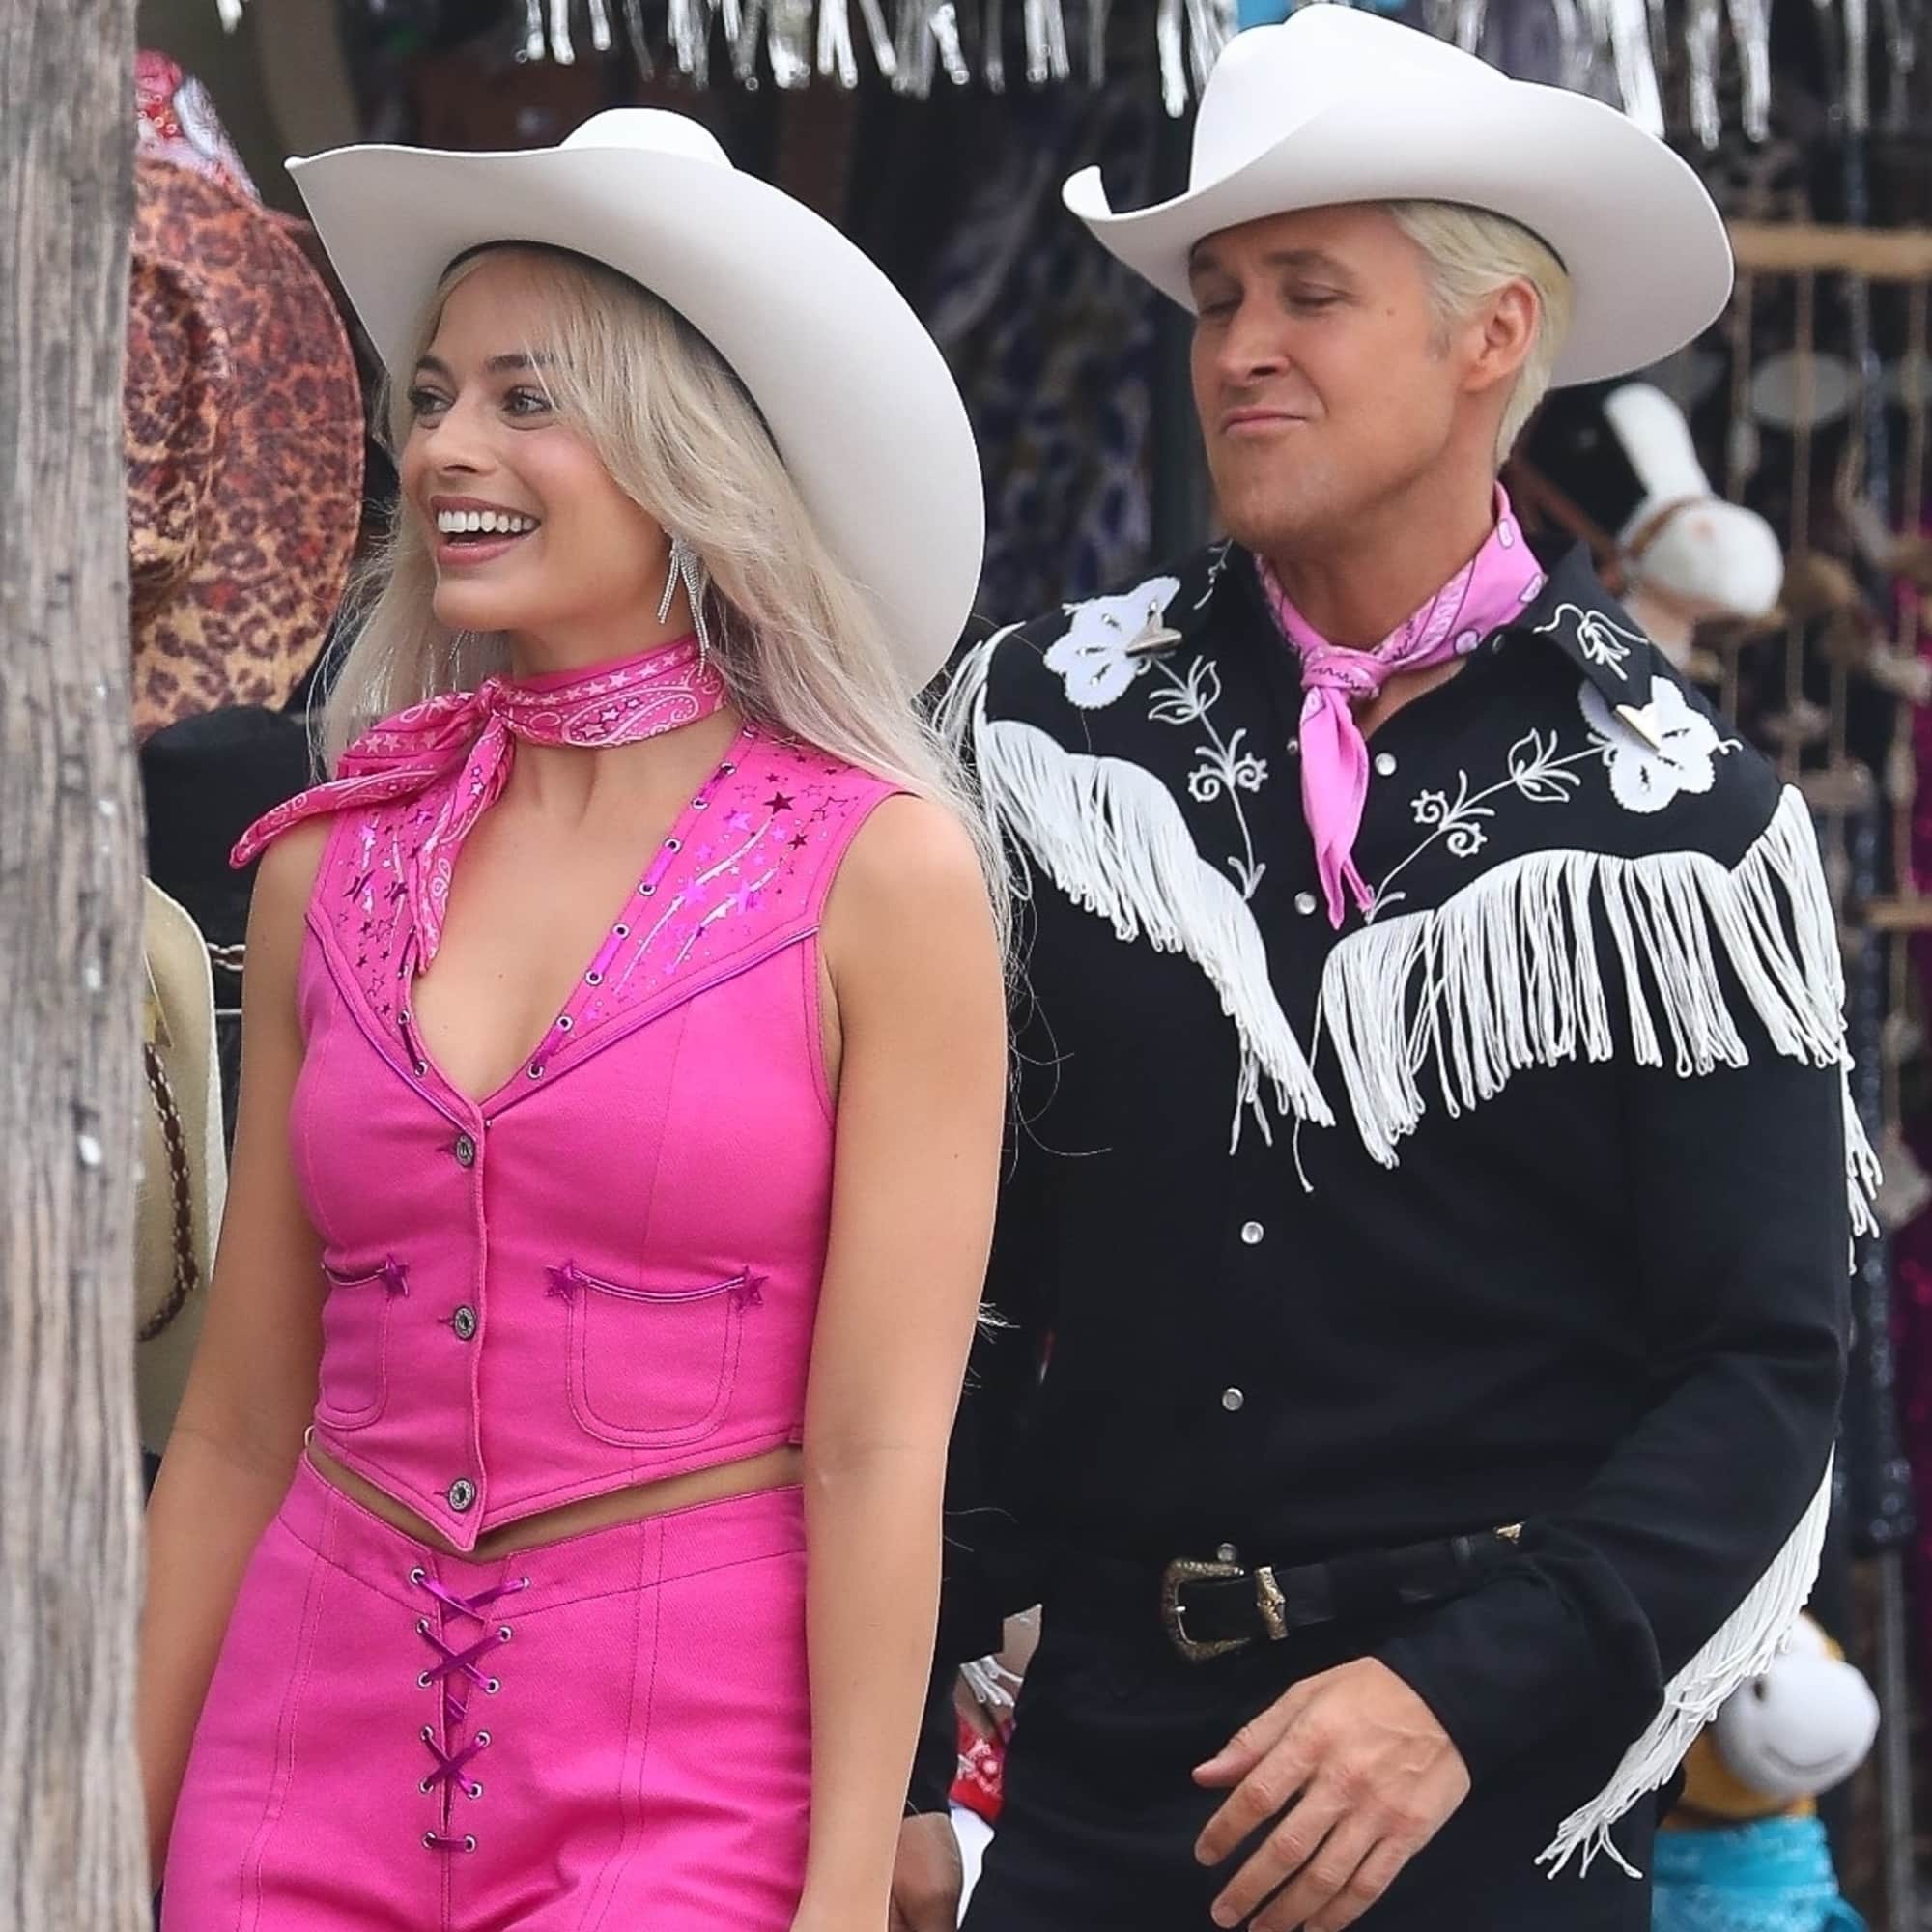 Ken and Barbie Costumes for Adults | Ken's Cowboy Costume